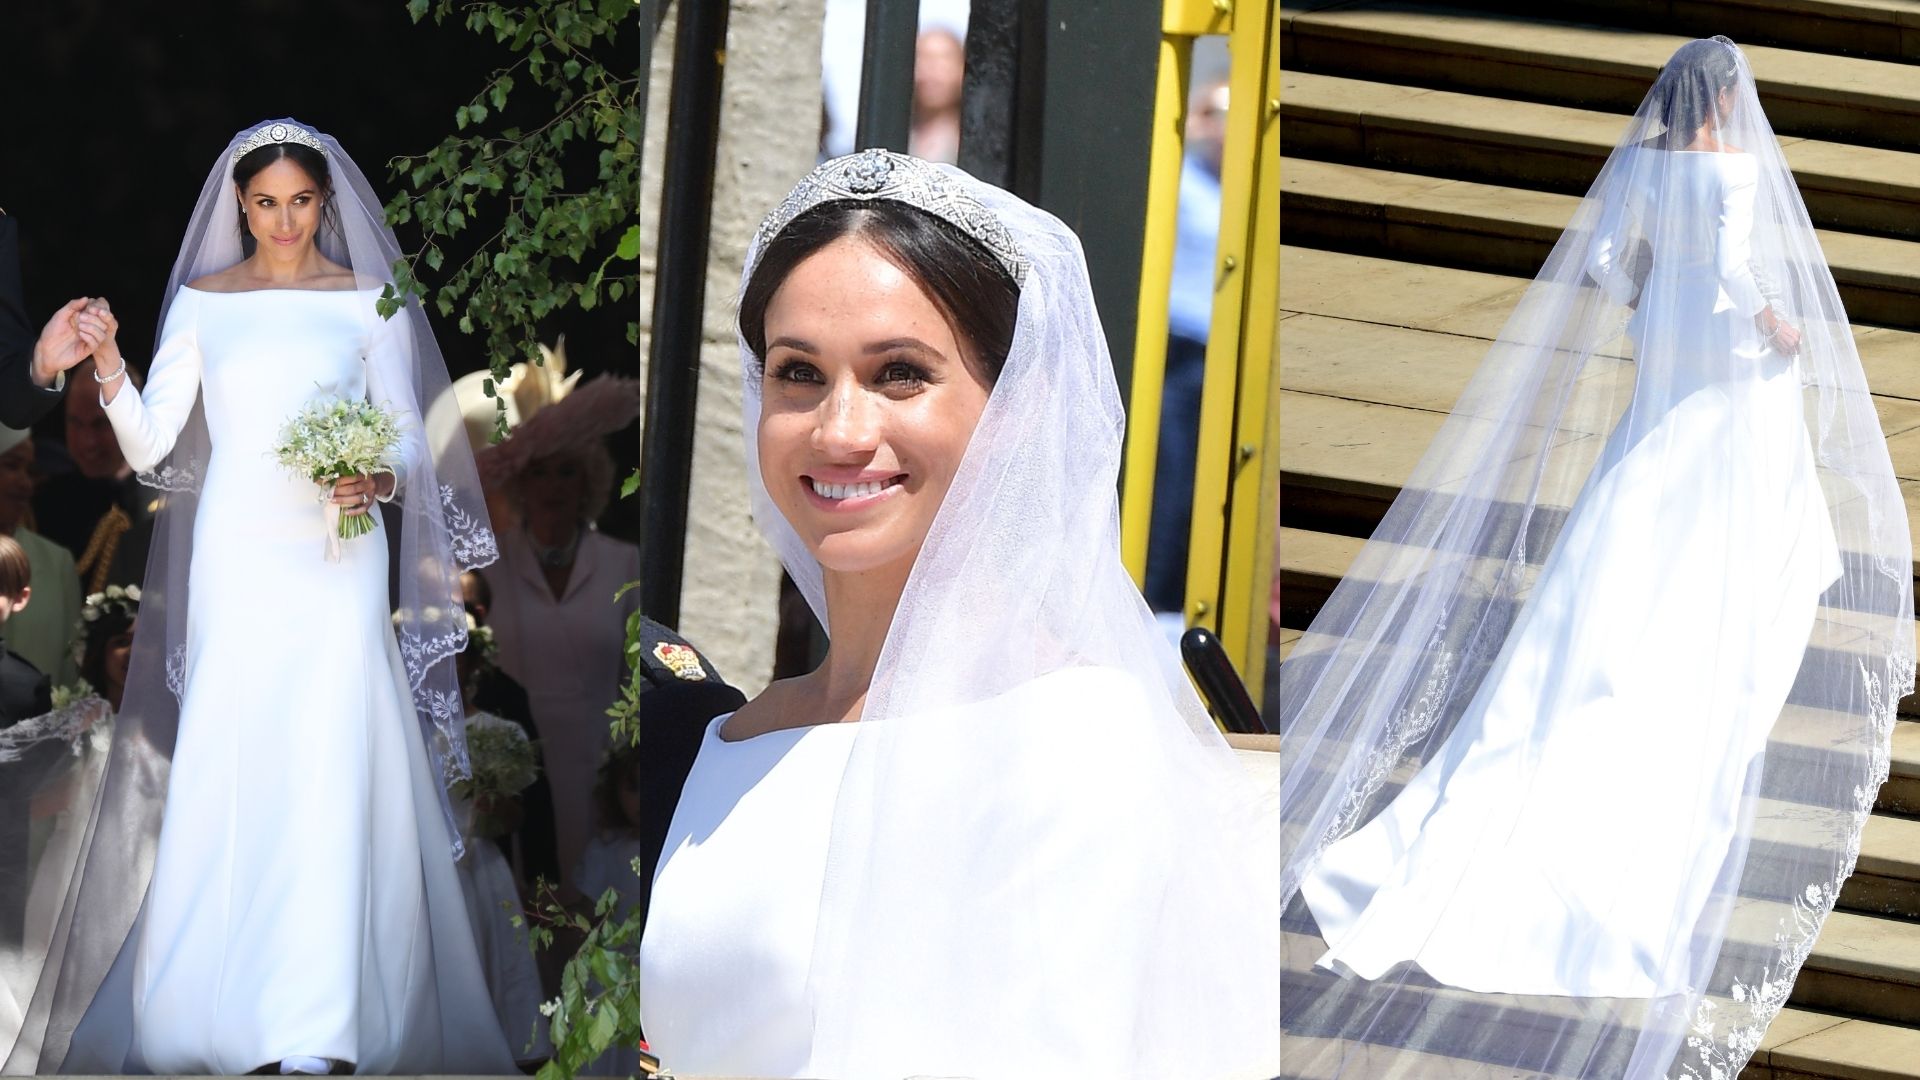 Meghan Markle is reportedly wearing a Ralph & Russo wedding gown - here are  their stunning designs